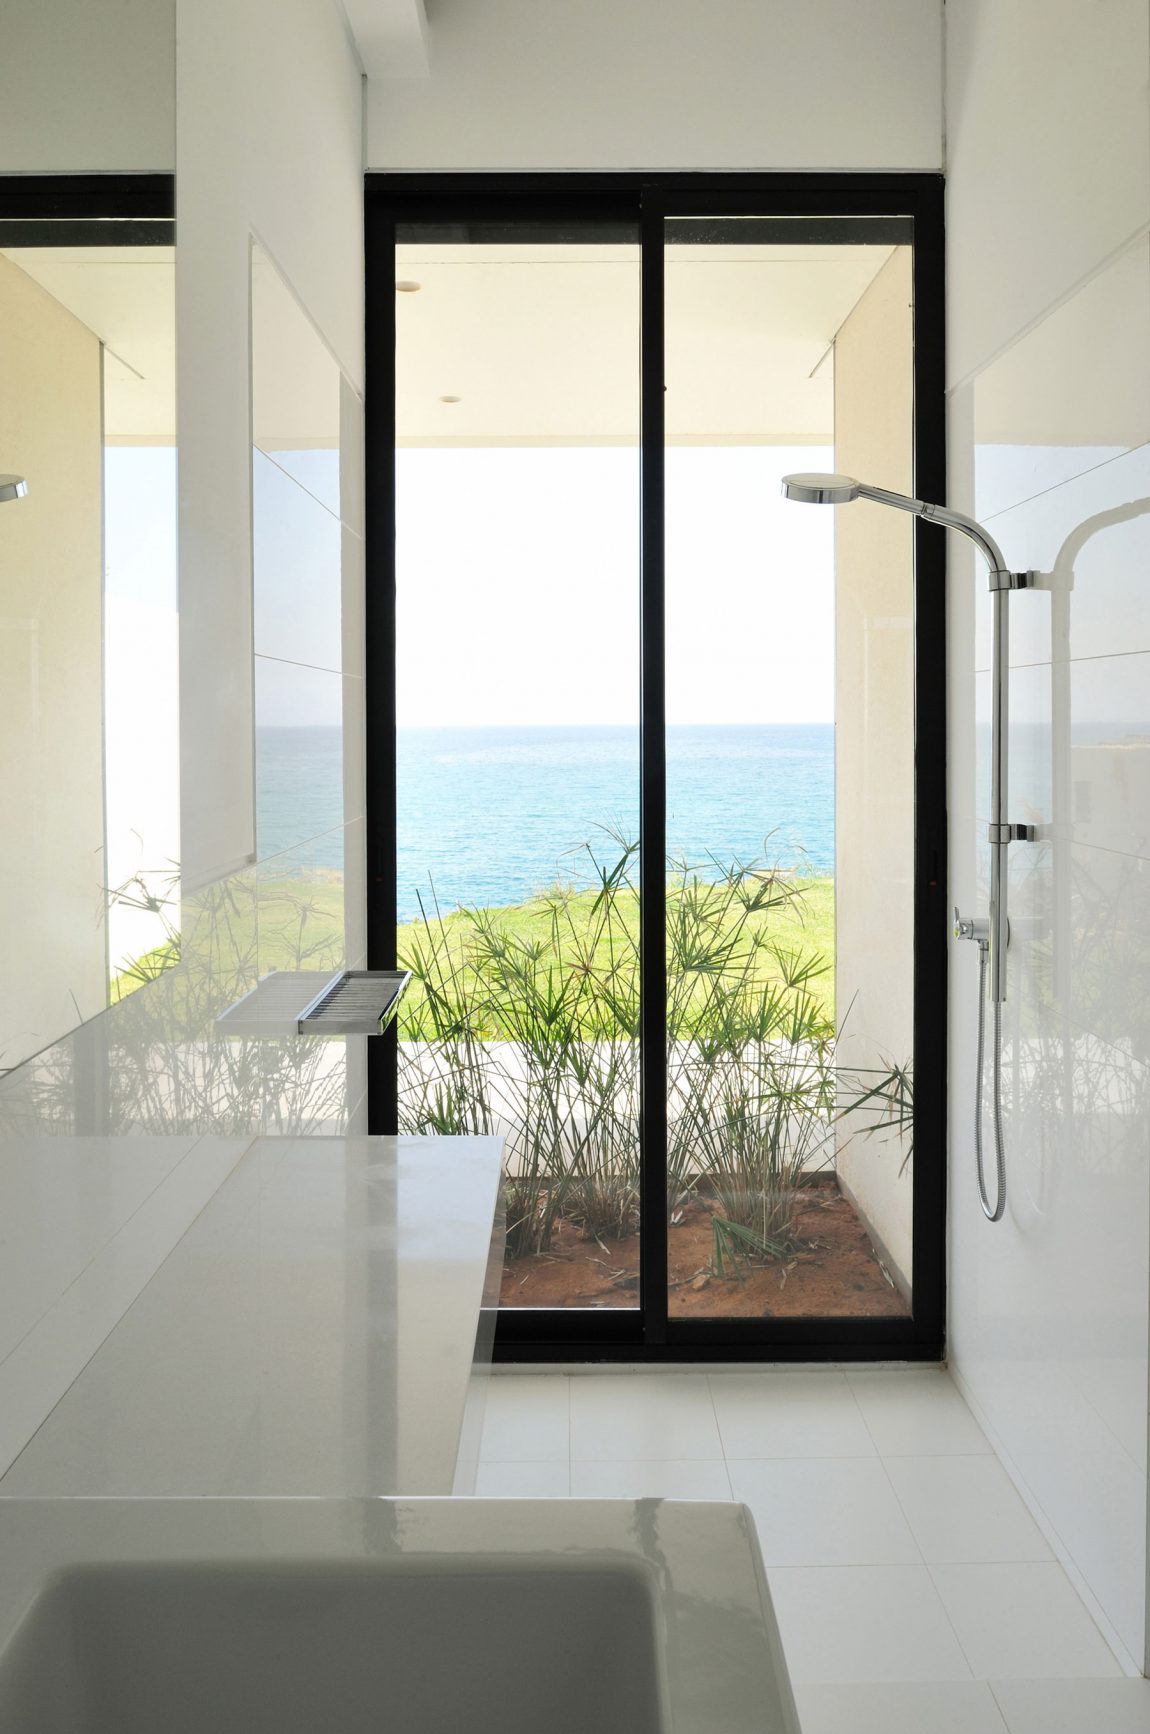 Beach View Plants Wonderful Beach View And Ornamental Plants Fidar Beach House Interior Glass Door In Dark Frame Stainless Steel Shower Porcelain Washing Stand Architecture Futuristic Modern Beach House With Neutral Color Palettes For A Family Of Five